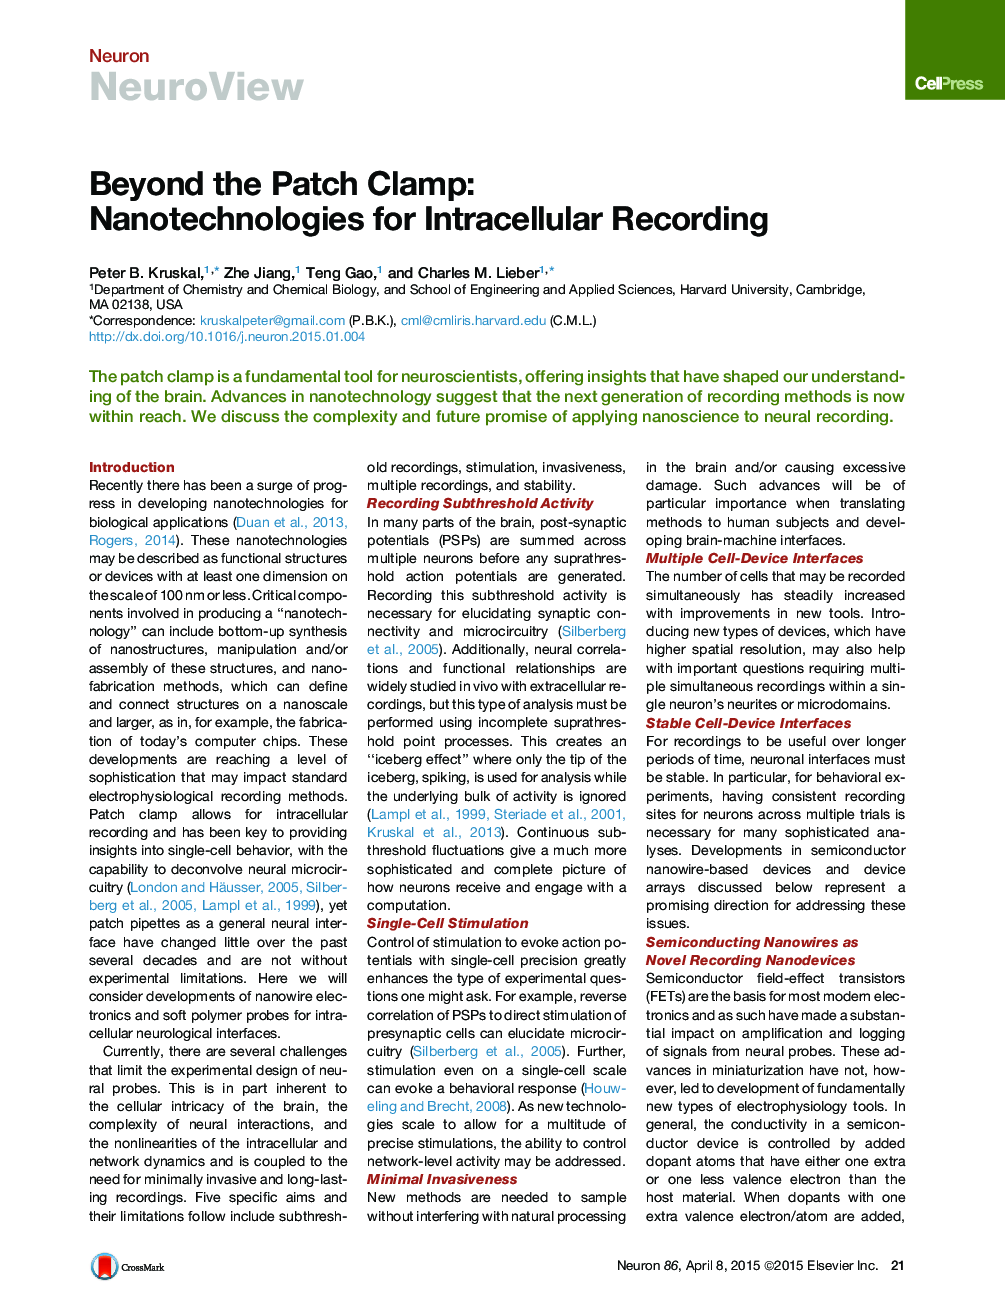 Beyond the Patch Clamp: Nanotechnologies for Intracellular Recording